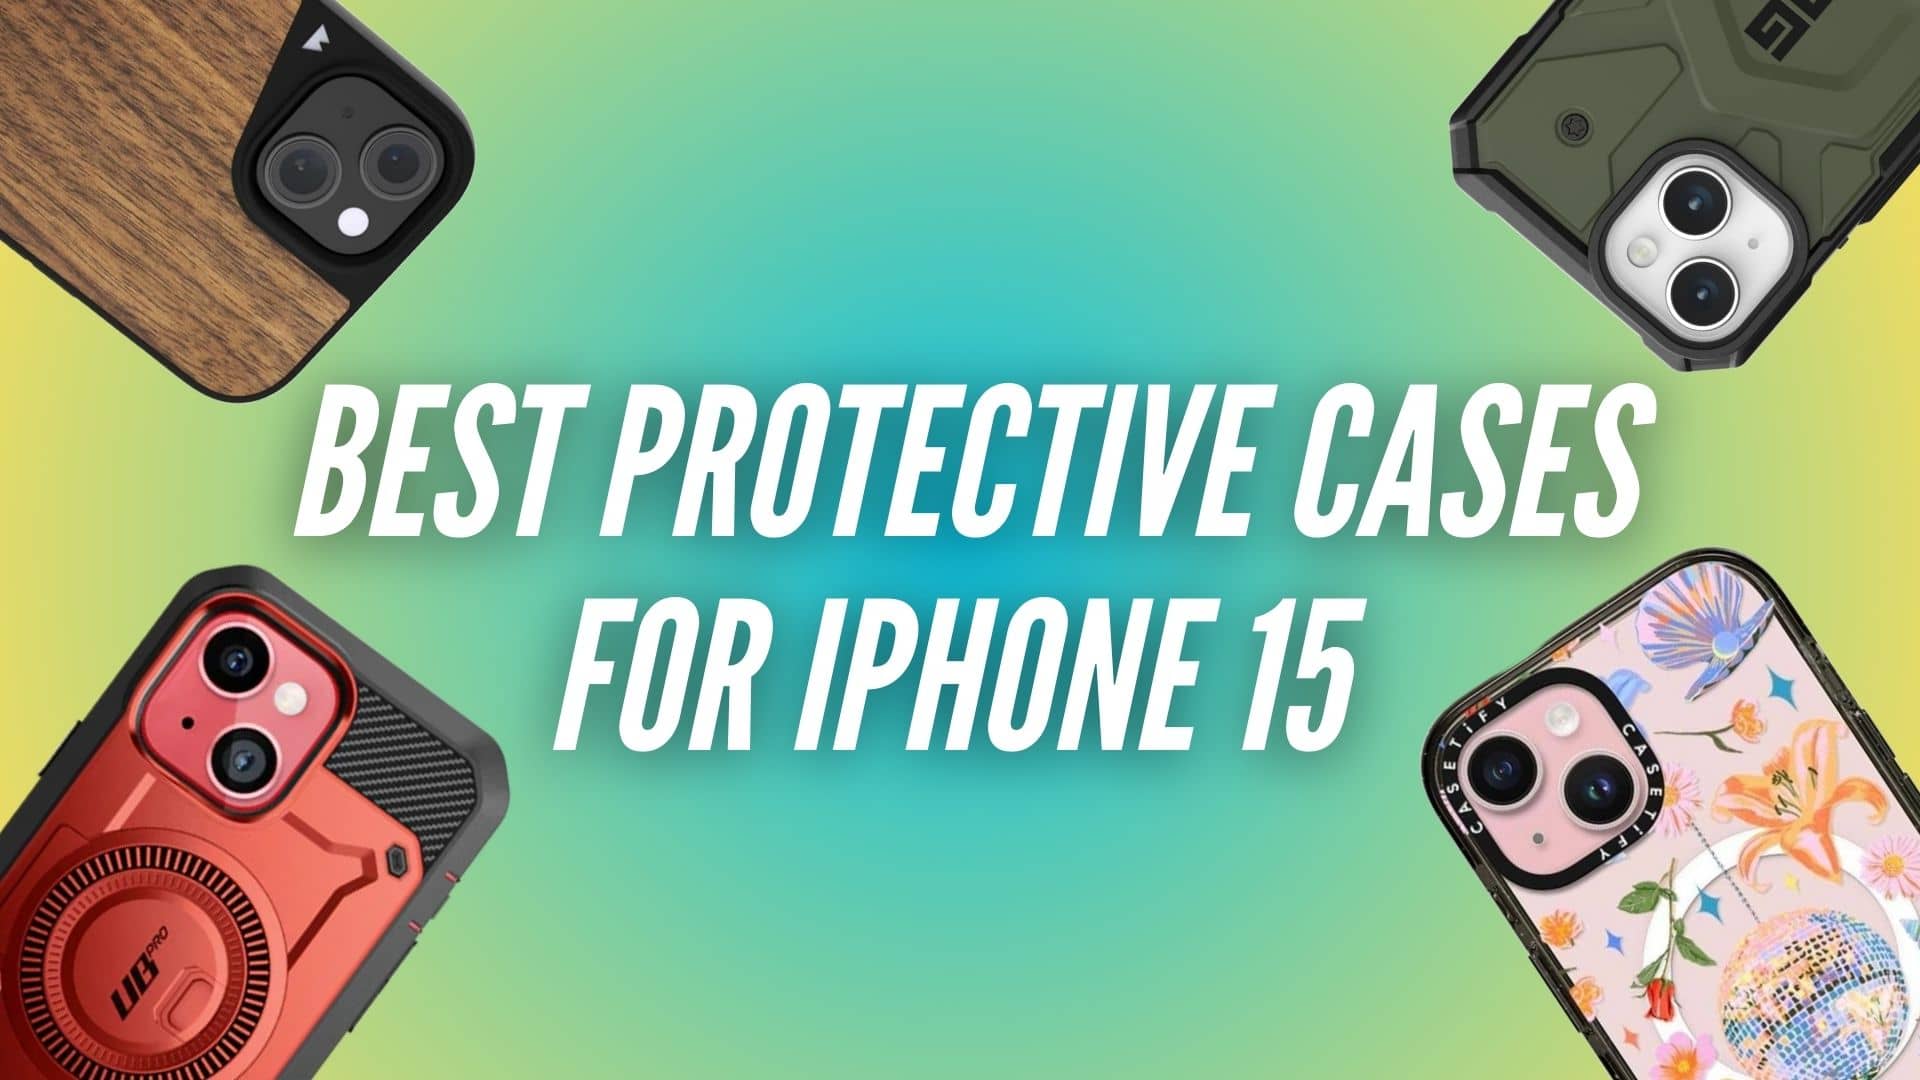 Best Protective Cases for iPhone 15